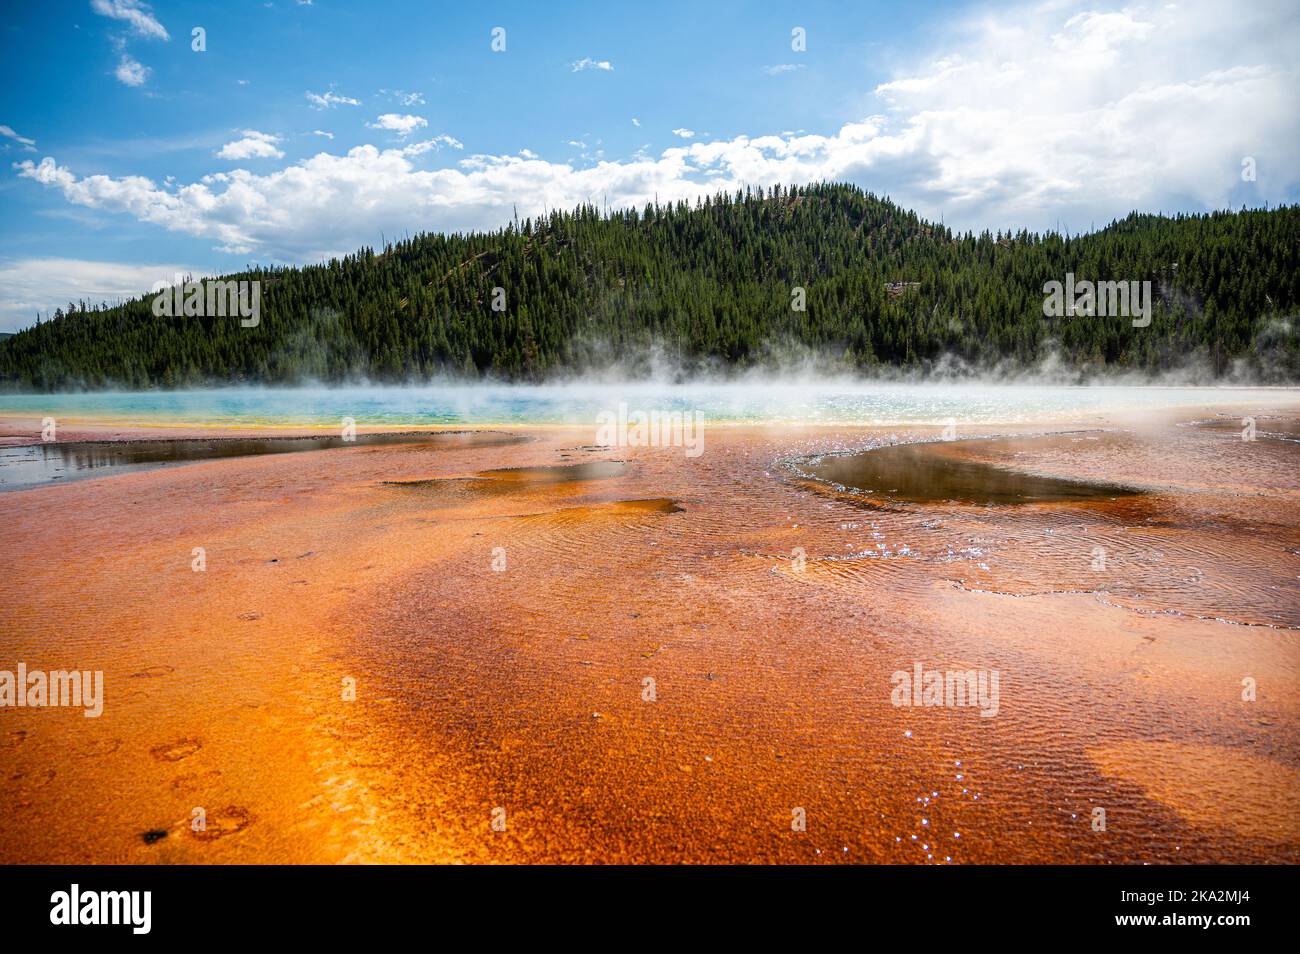 A beautiful shot of geysers and the hydrothermal system at the Yellowstone National Park Stock Photo